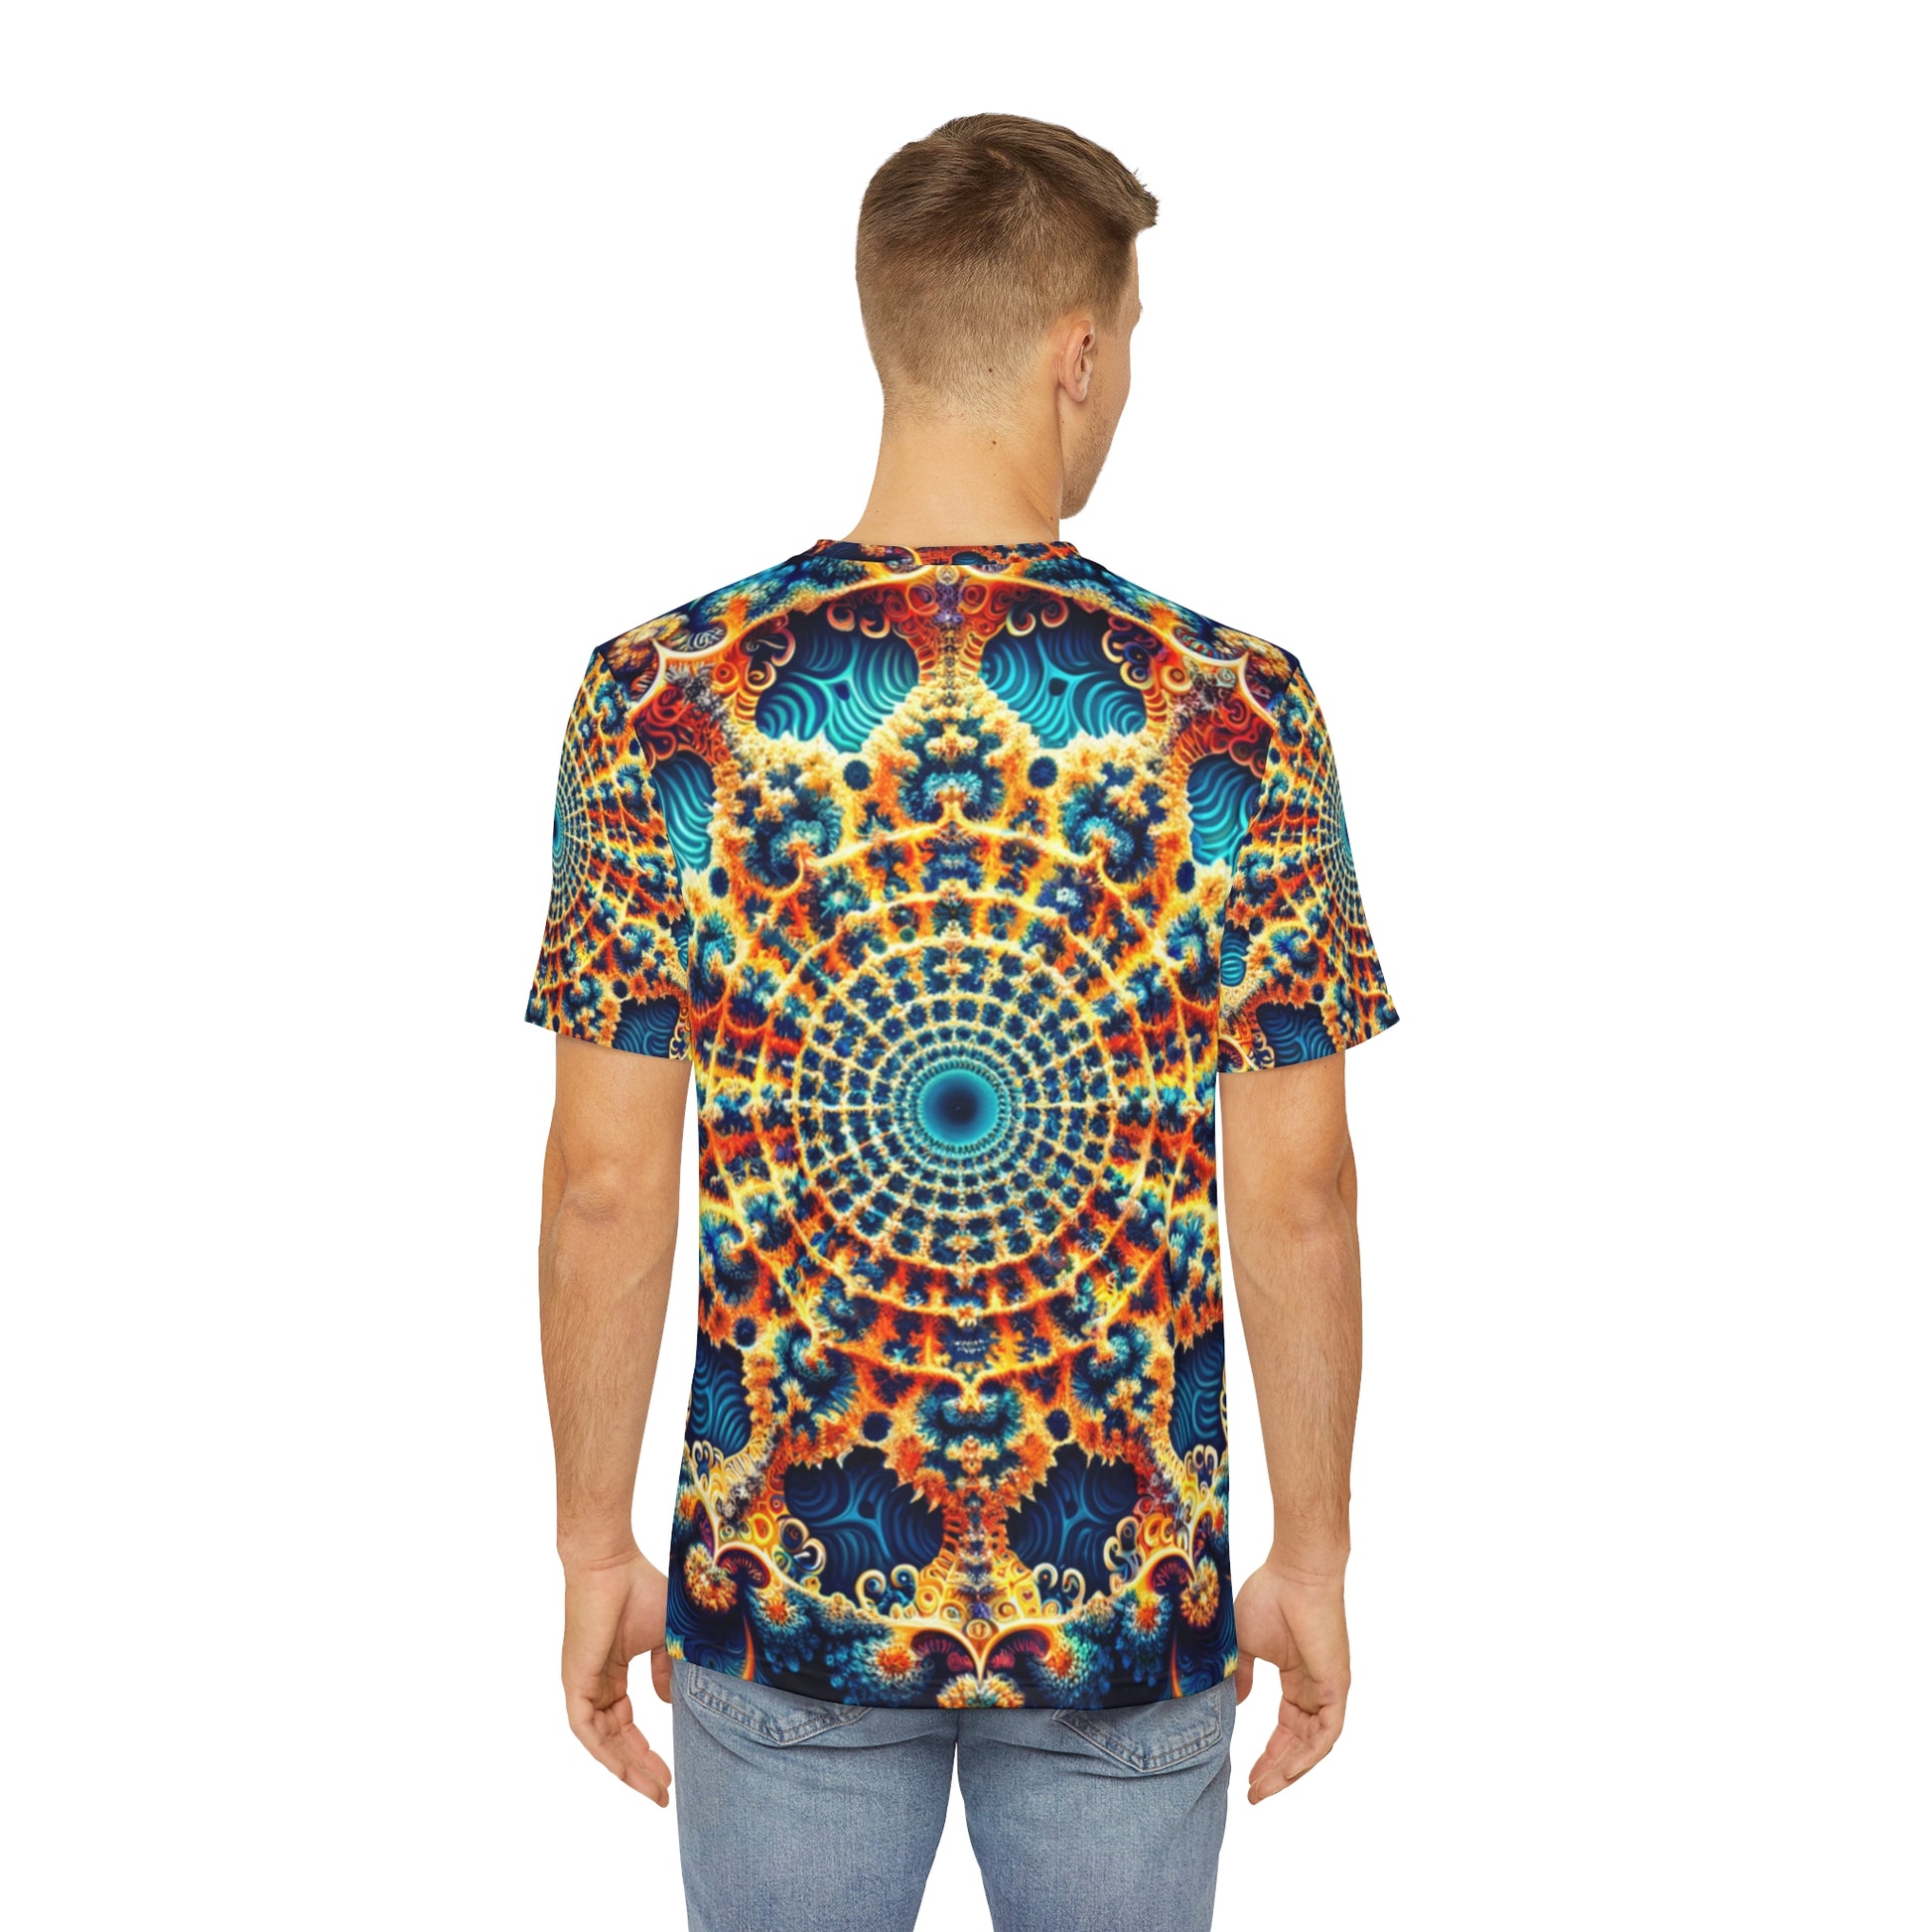 Back view of the Azurite Mandala Bloom Crewneck Pullover All-Over Print Short-Sleeved Shirt blue yellow red white mandala pattern paired with casual denim pants worn by a white man